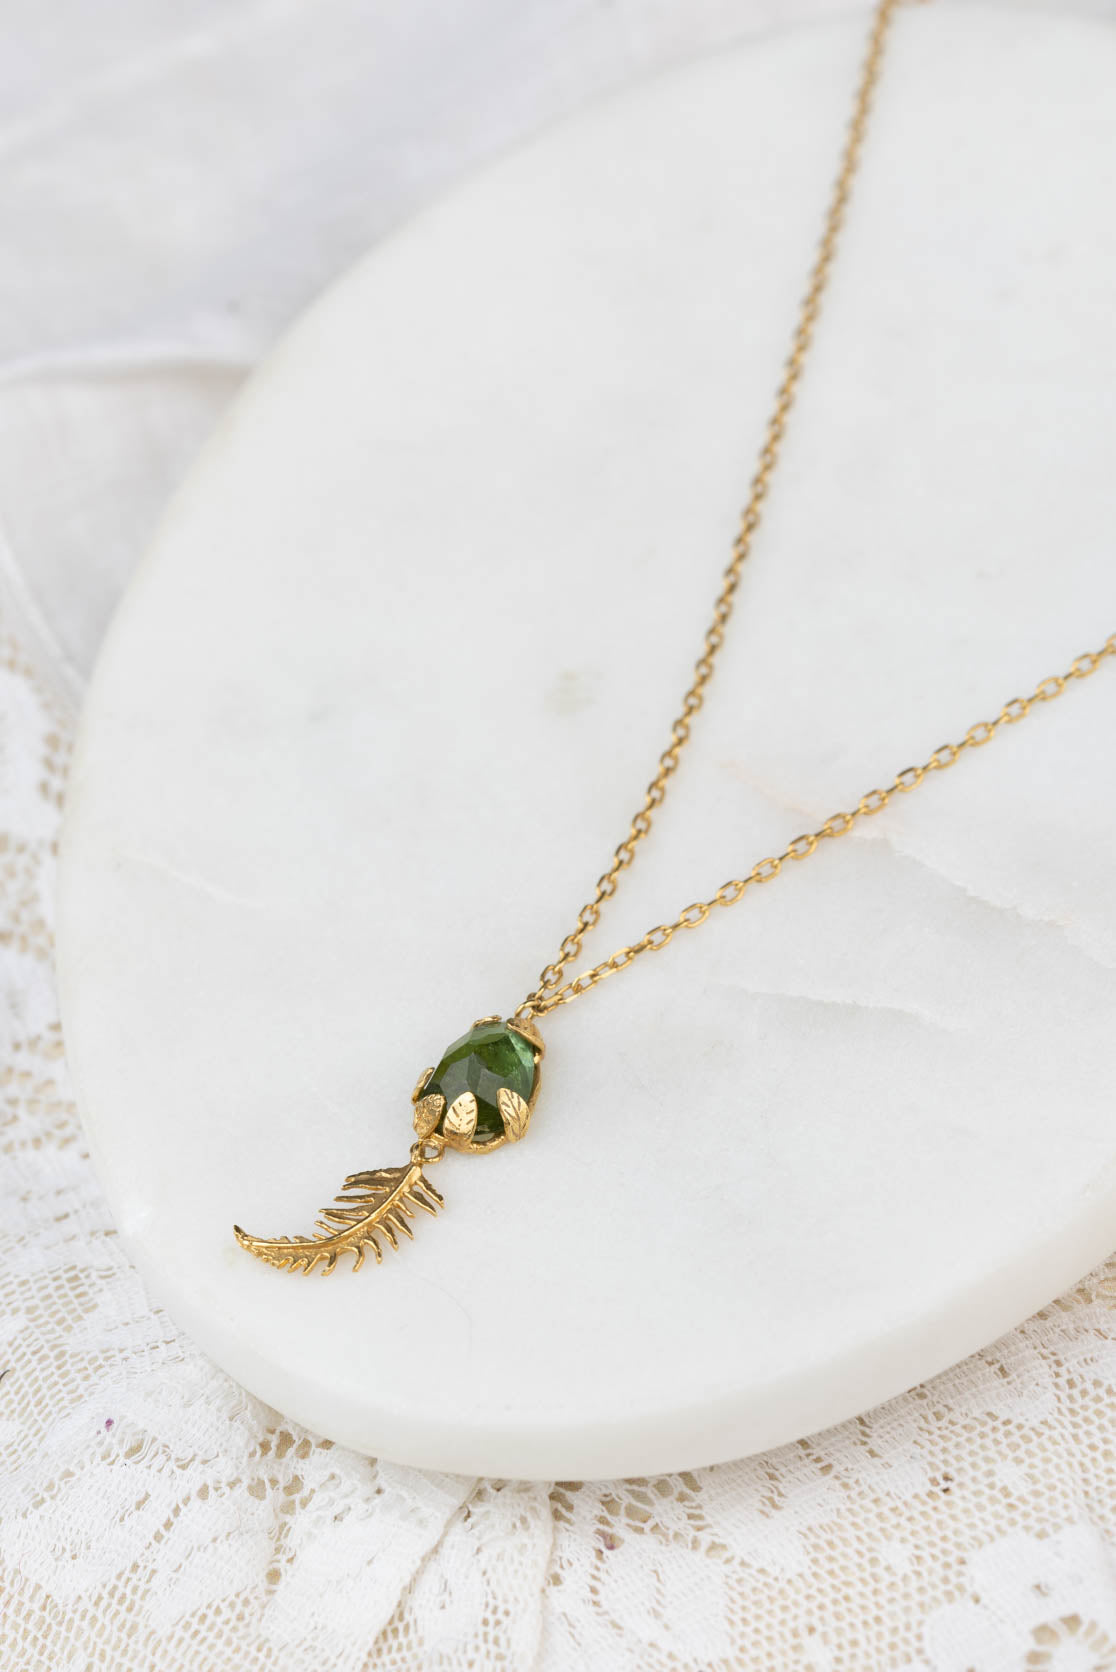 Tourmaline Necklace With Fern Drop - green